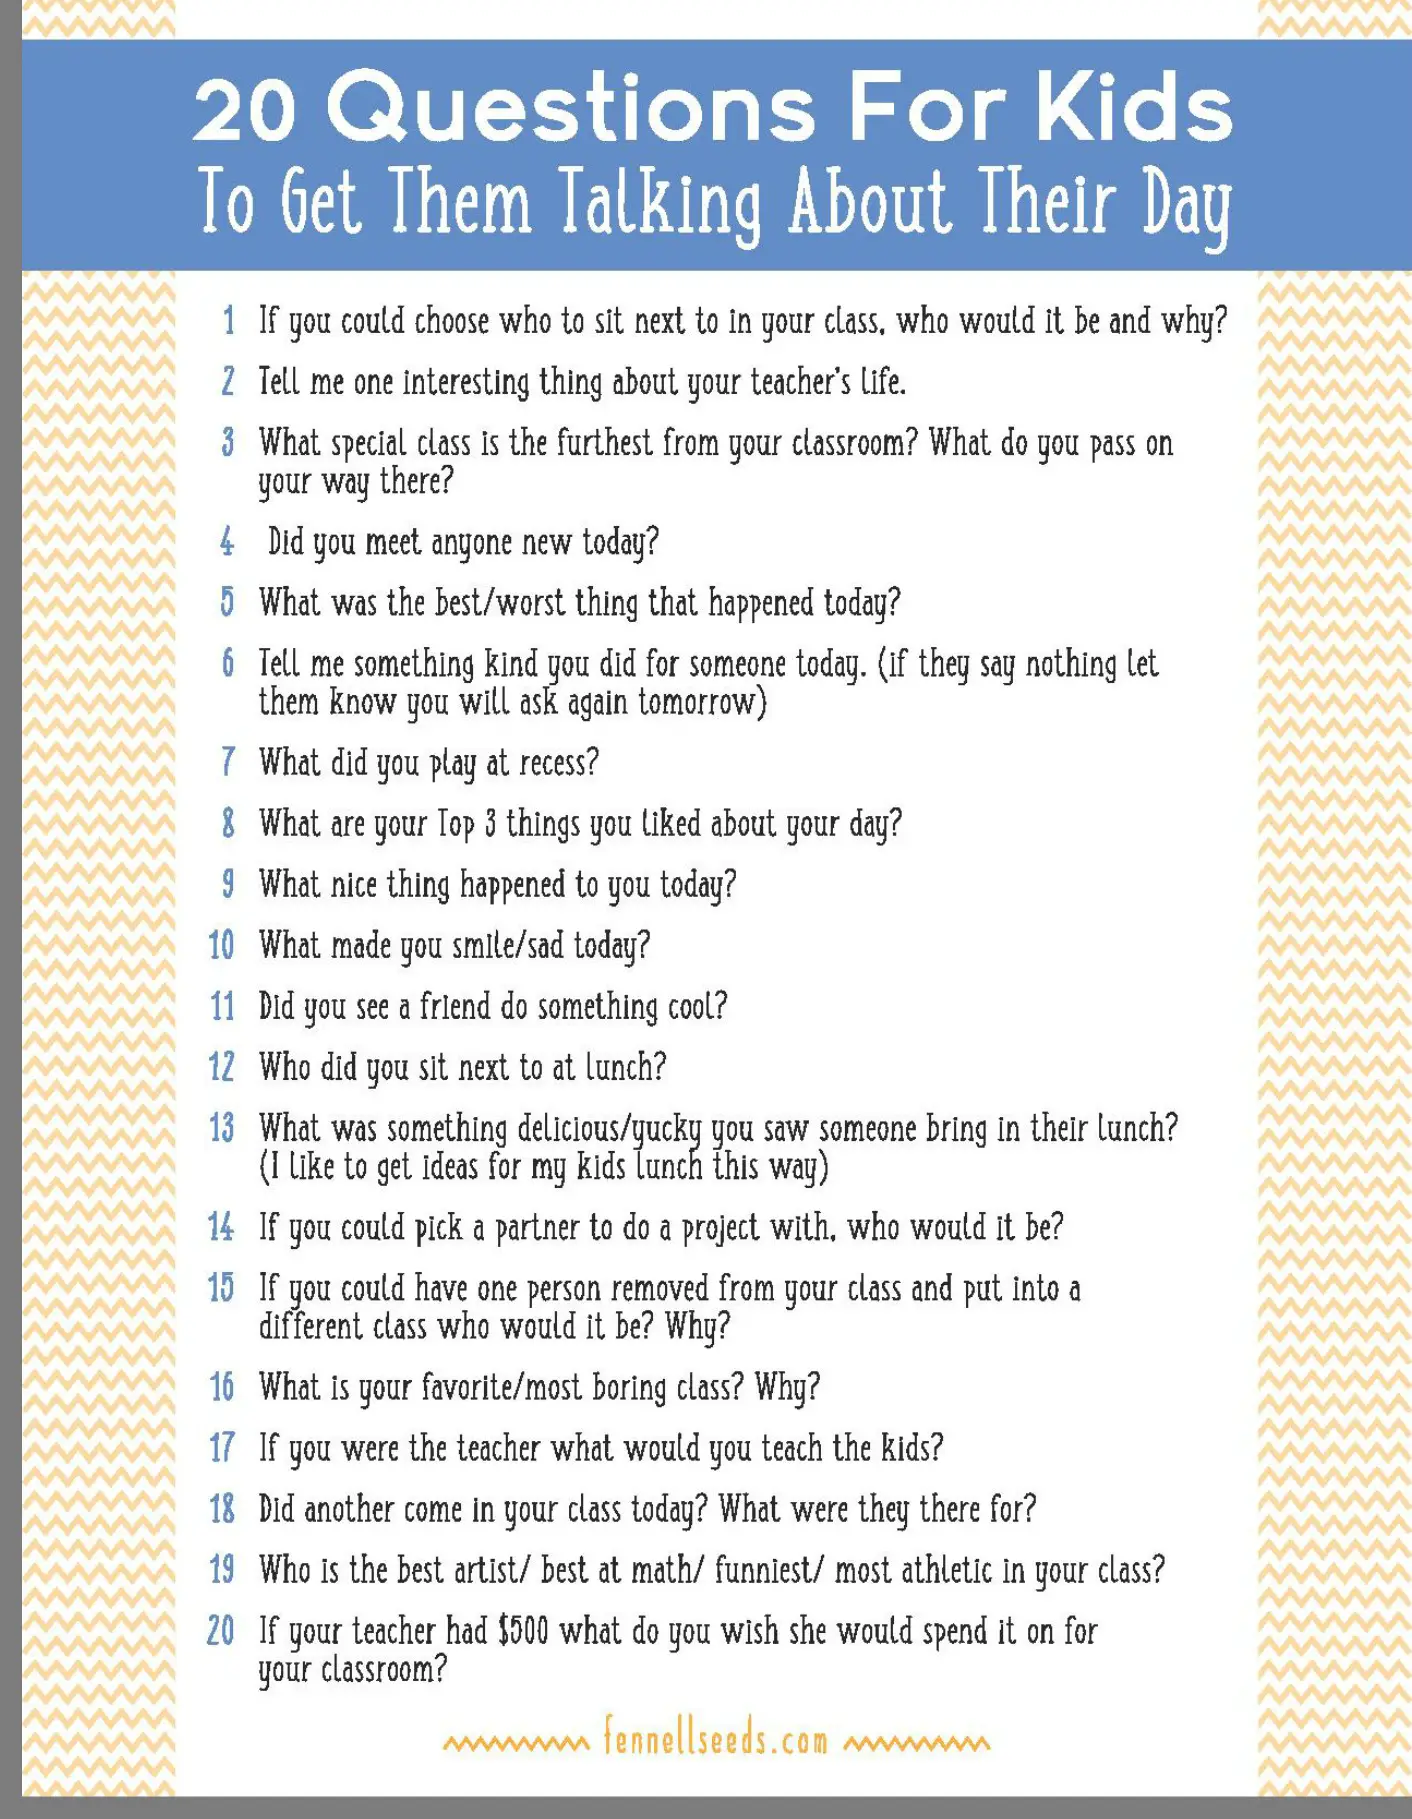 15-questions-for-kids-to-get-them-talking-about-their-day